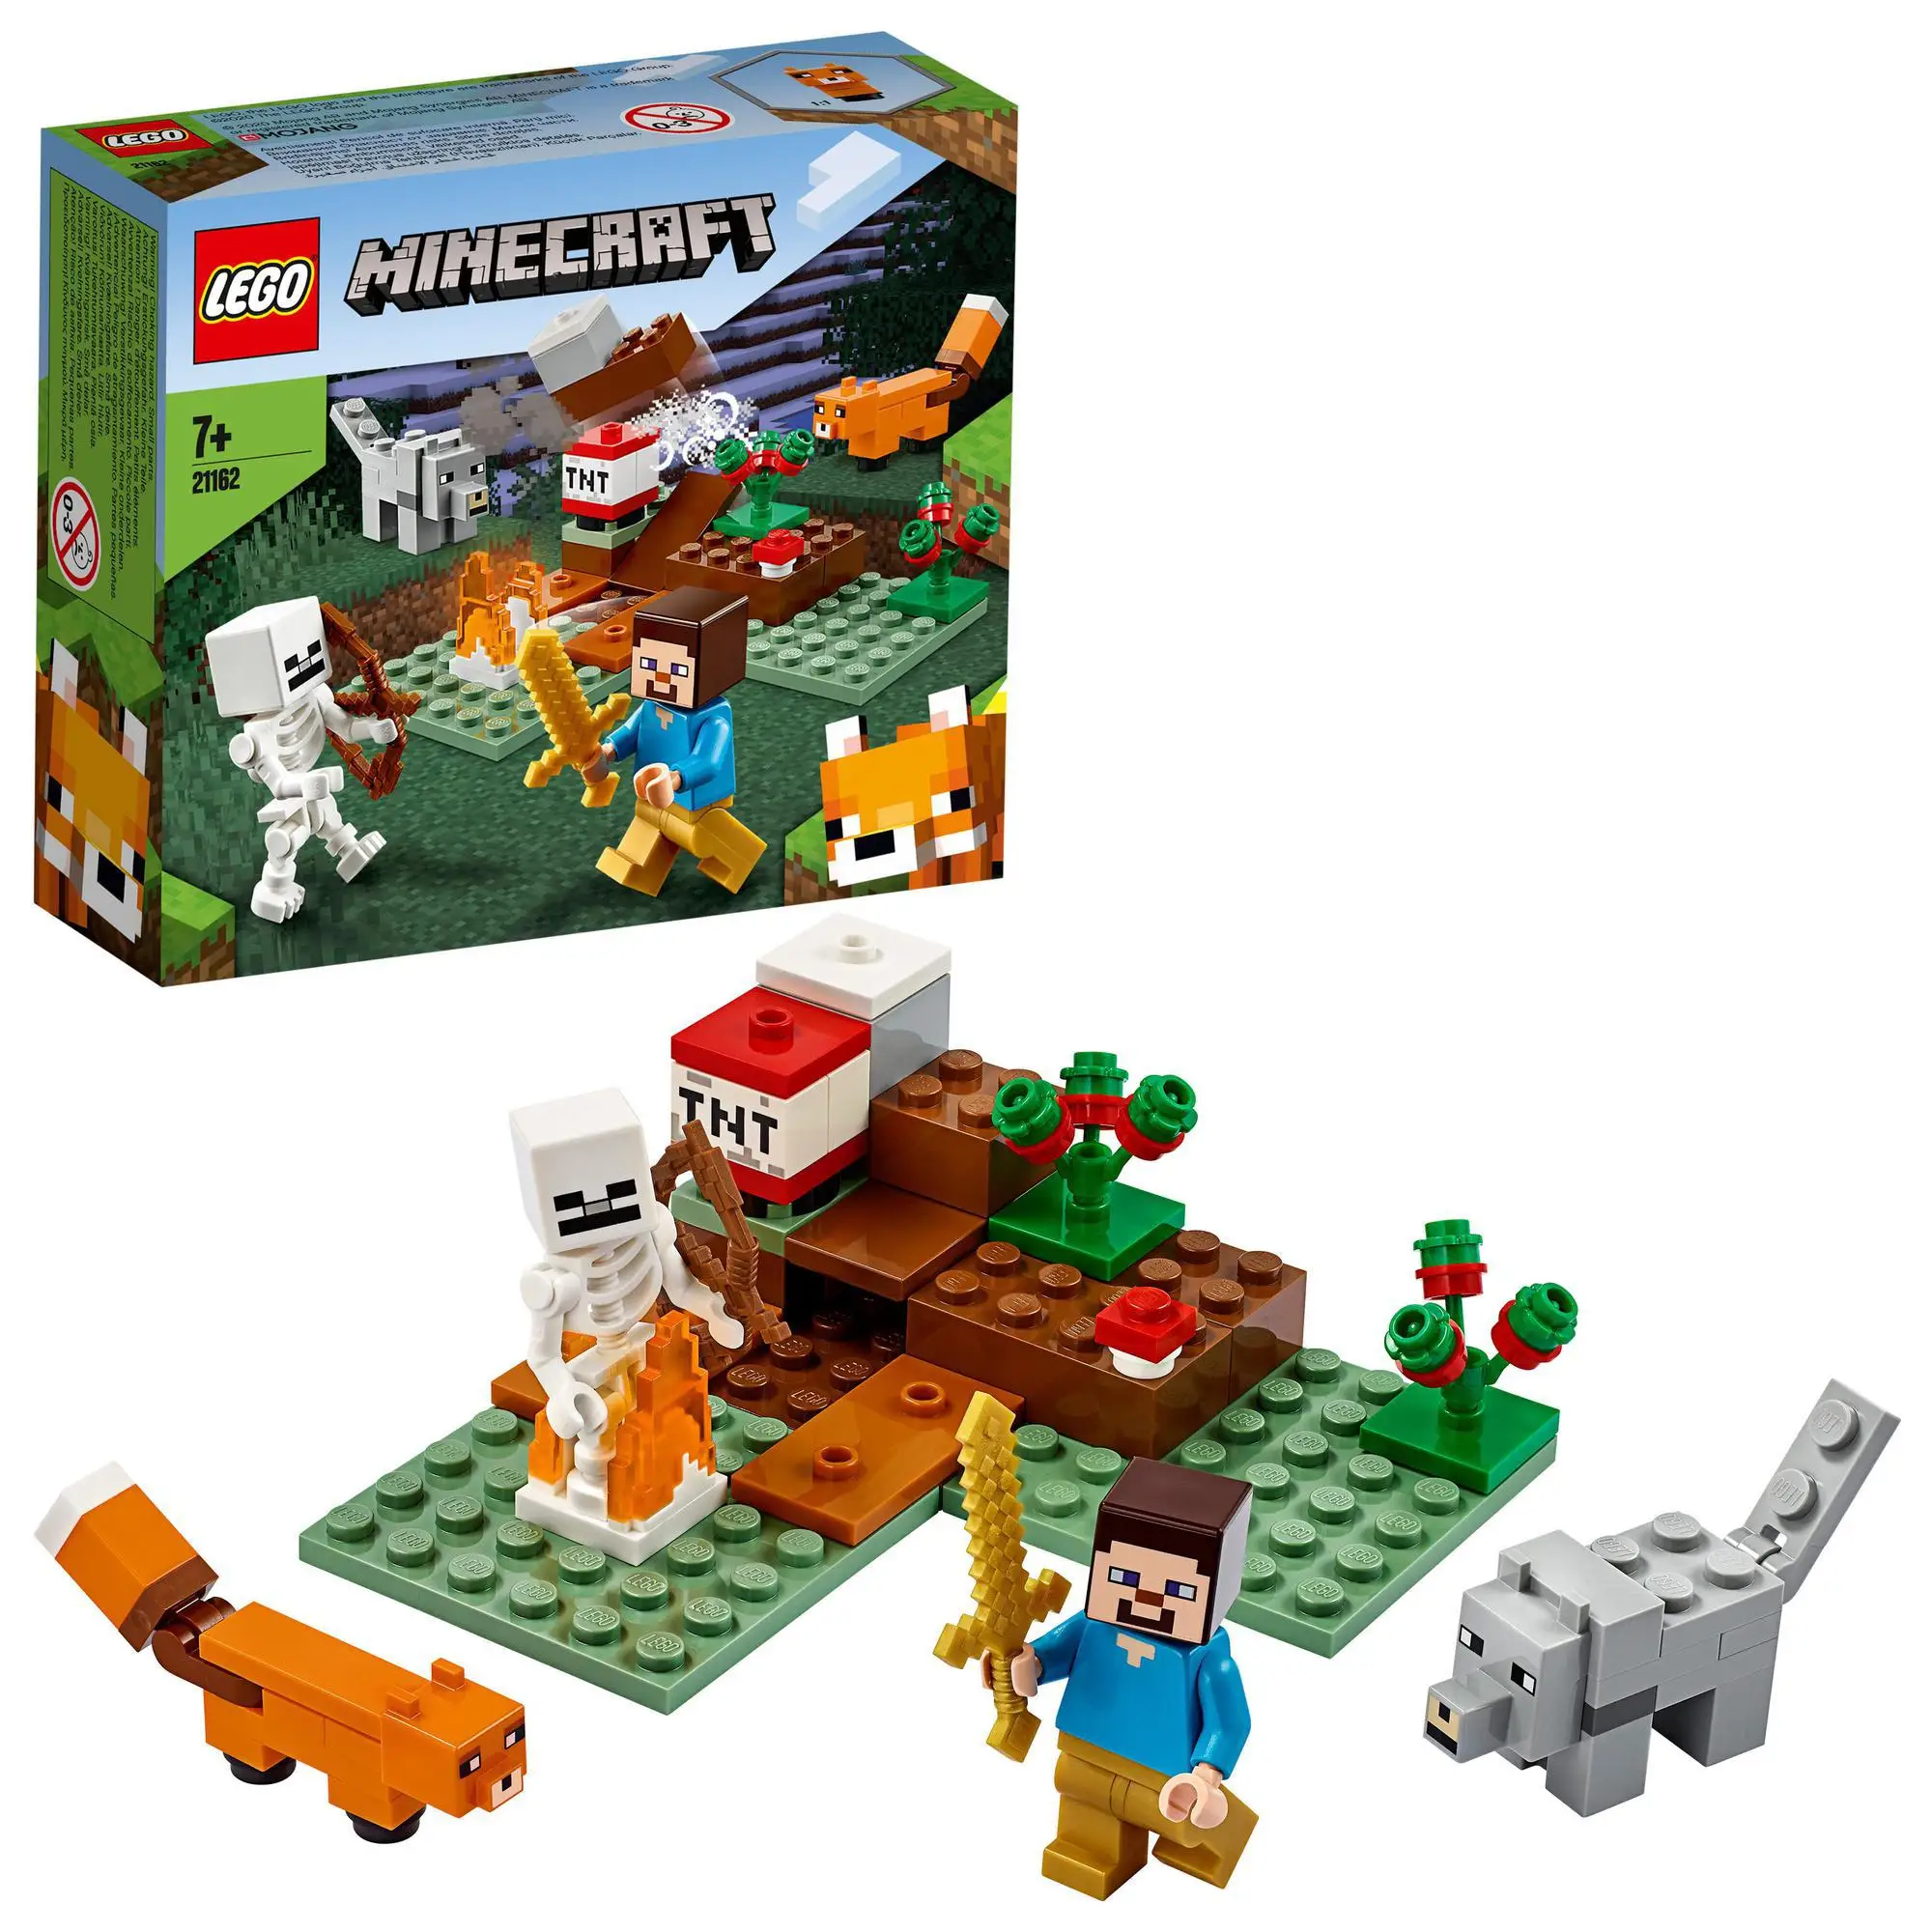 Lego Original 21162 Minecraft The Adventure In The Taiga Construction Toy Children + 7 Years With Steve, Skeleton, Fox And Wolf - Soft Plastic Blocks -